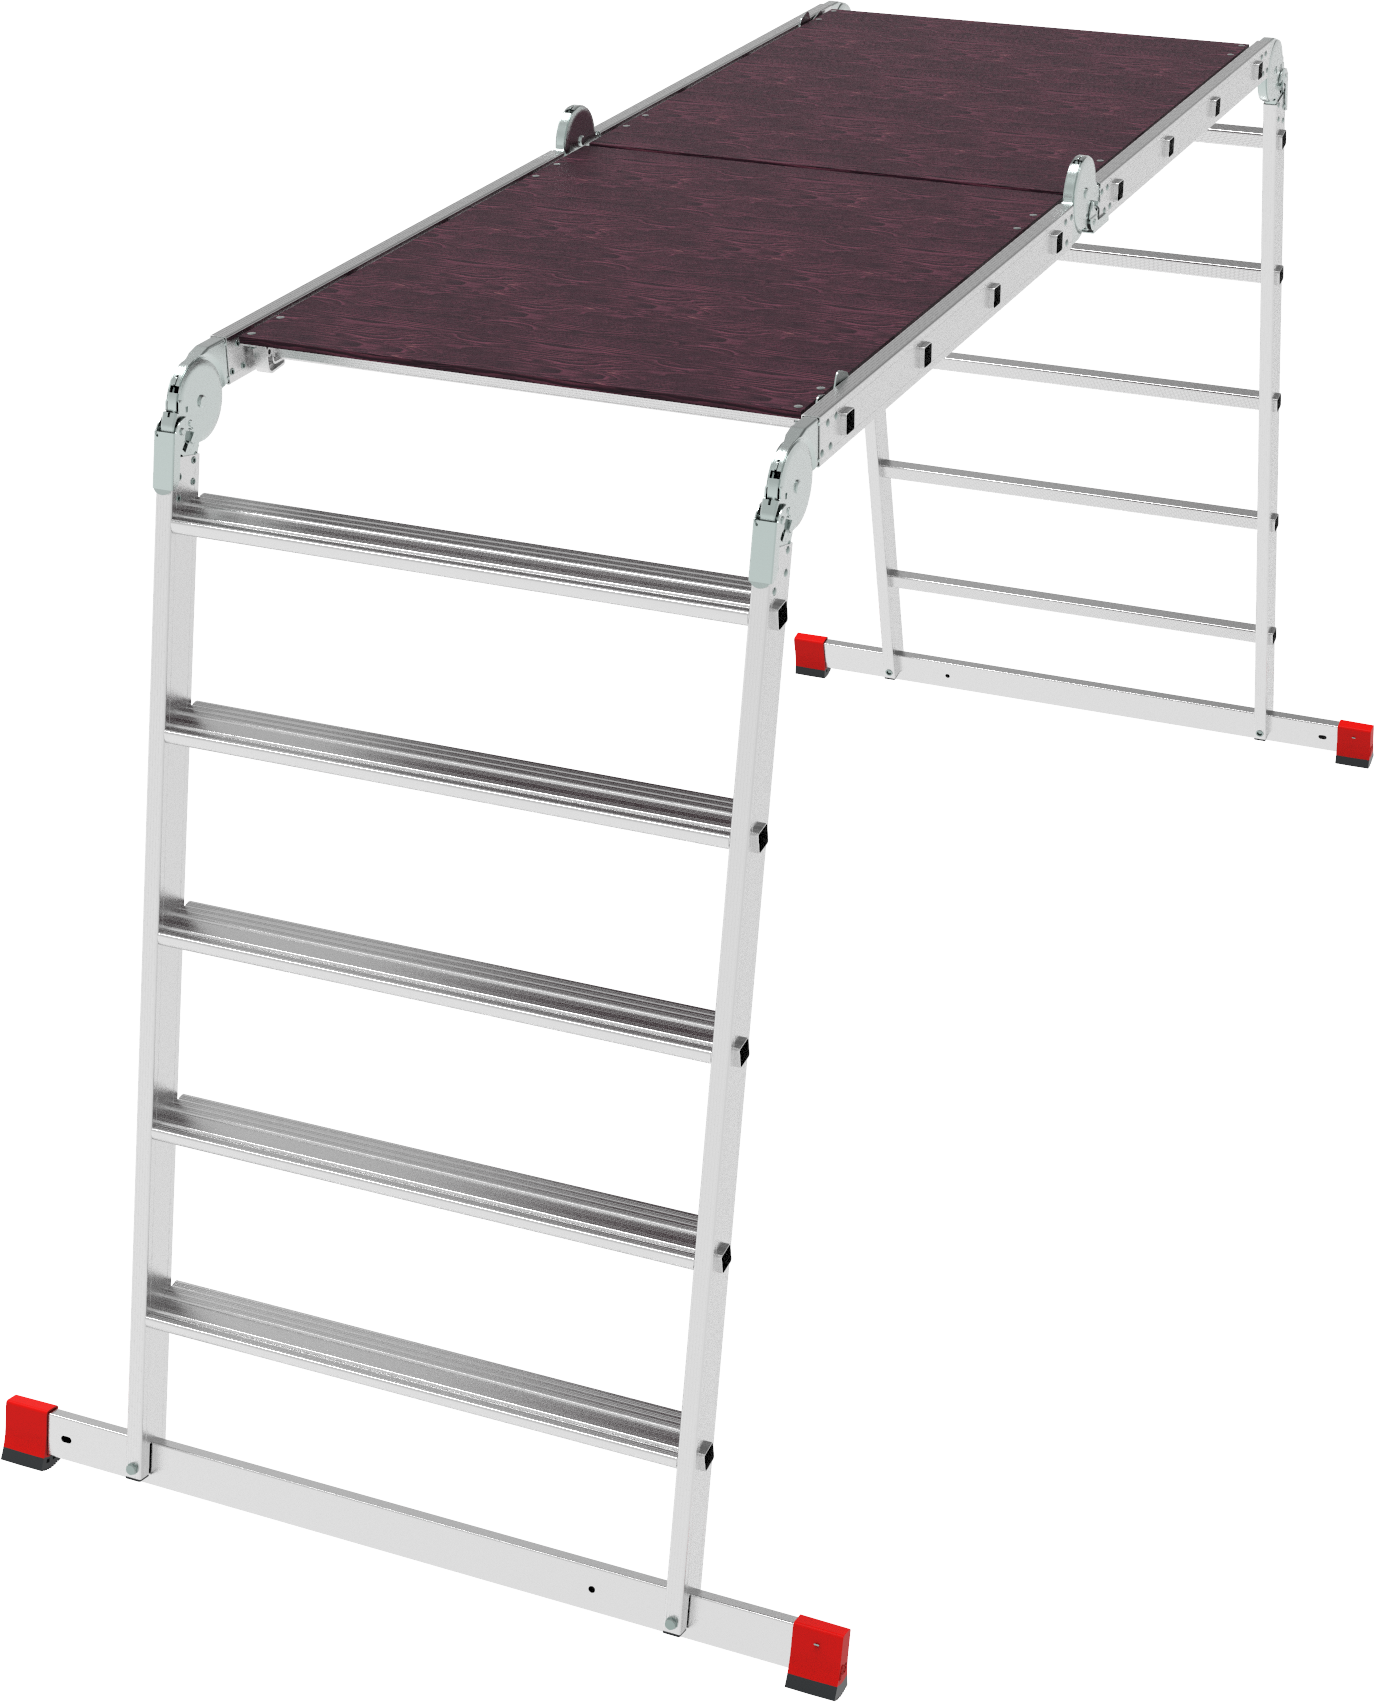 Multipurpose aluminum professional hinged rung ladder 800 mm width with 80 mm flanged steps and platform NV3336 sku 3336245